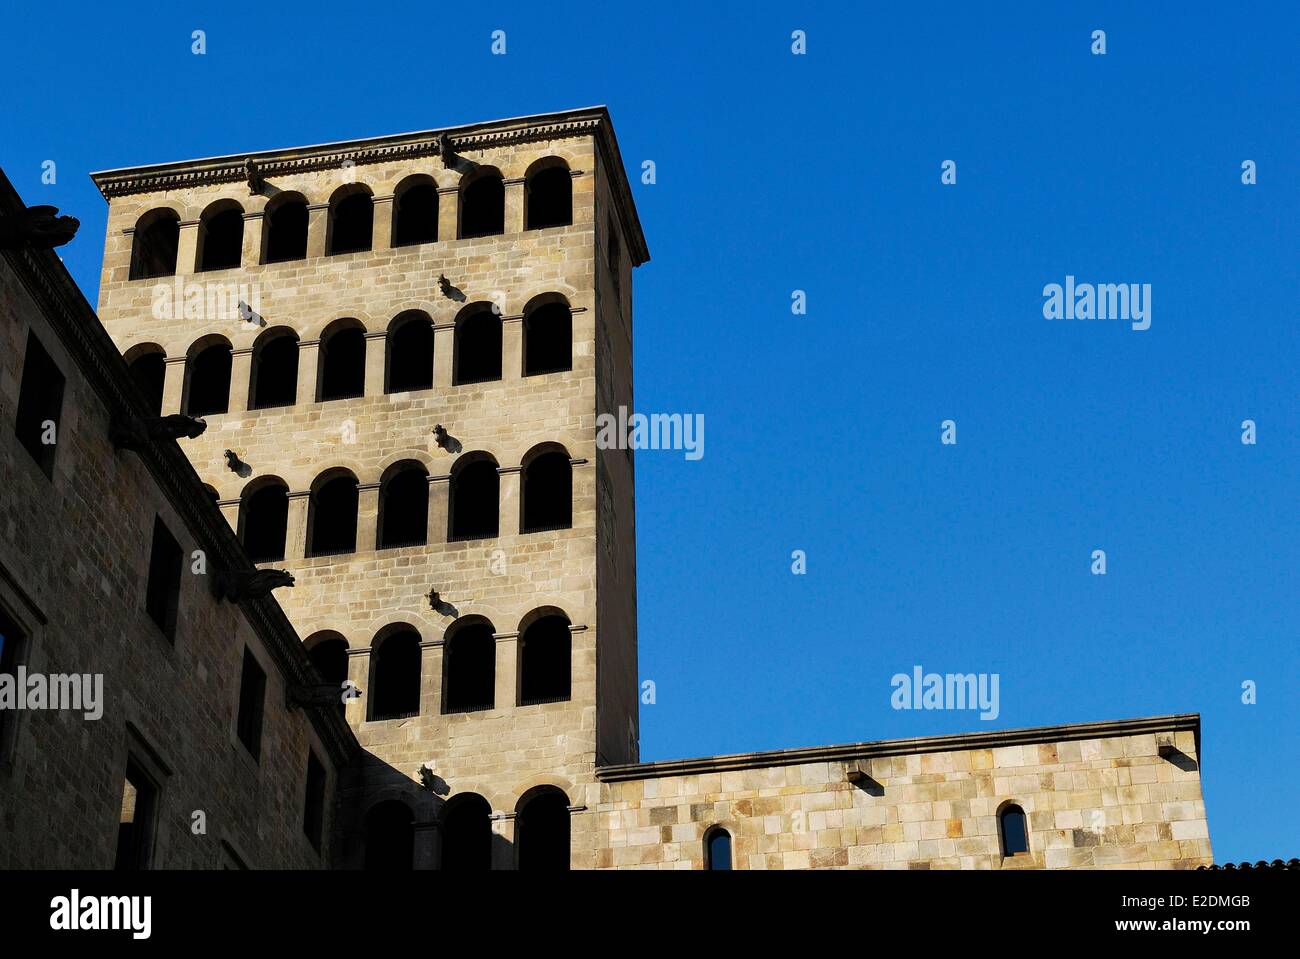 Spain Catalonia Barcelona Placa del Rei the tower of King Marti of the royal palace the Palau Reial Major residence of the Stock Photo